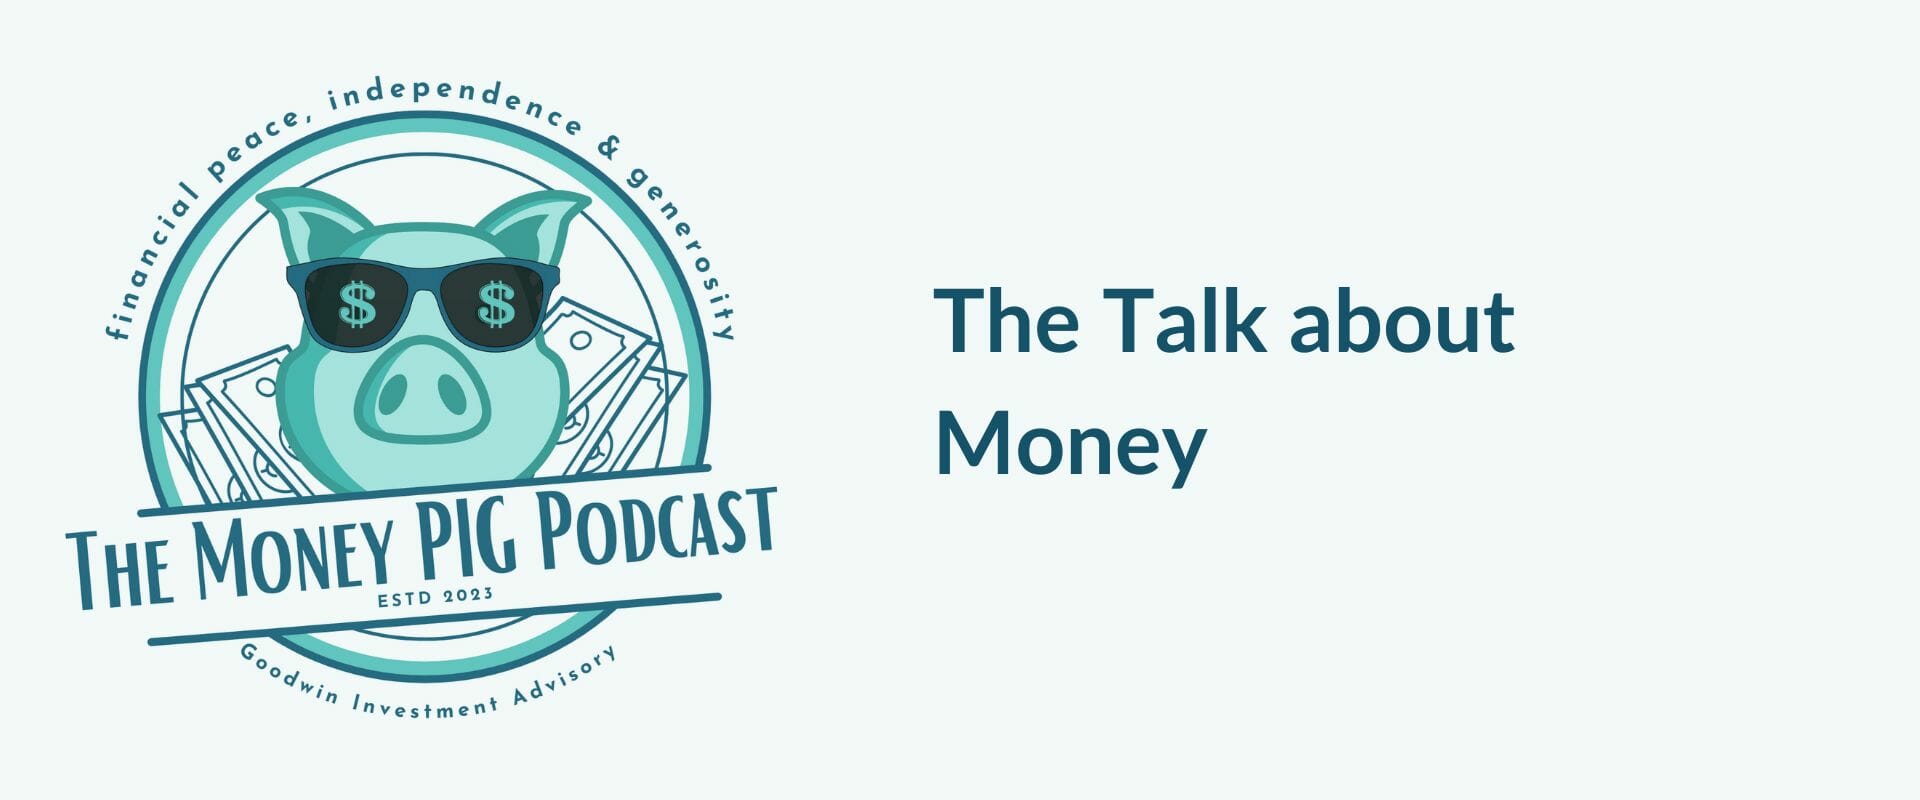 The Talk about Money with Dale Alexander